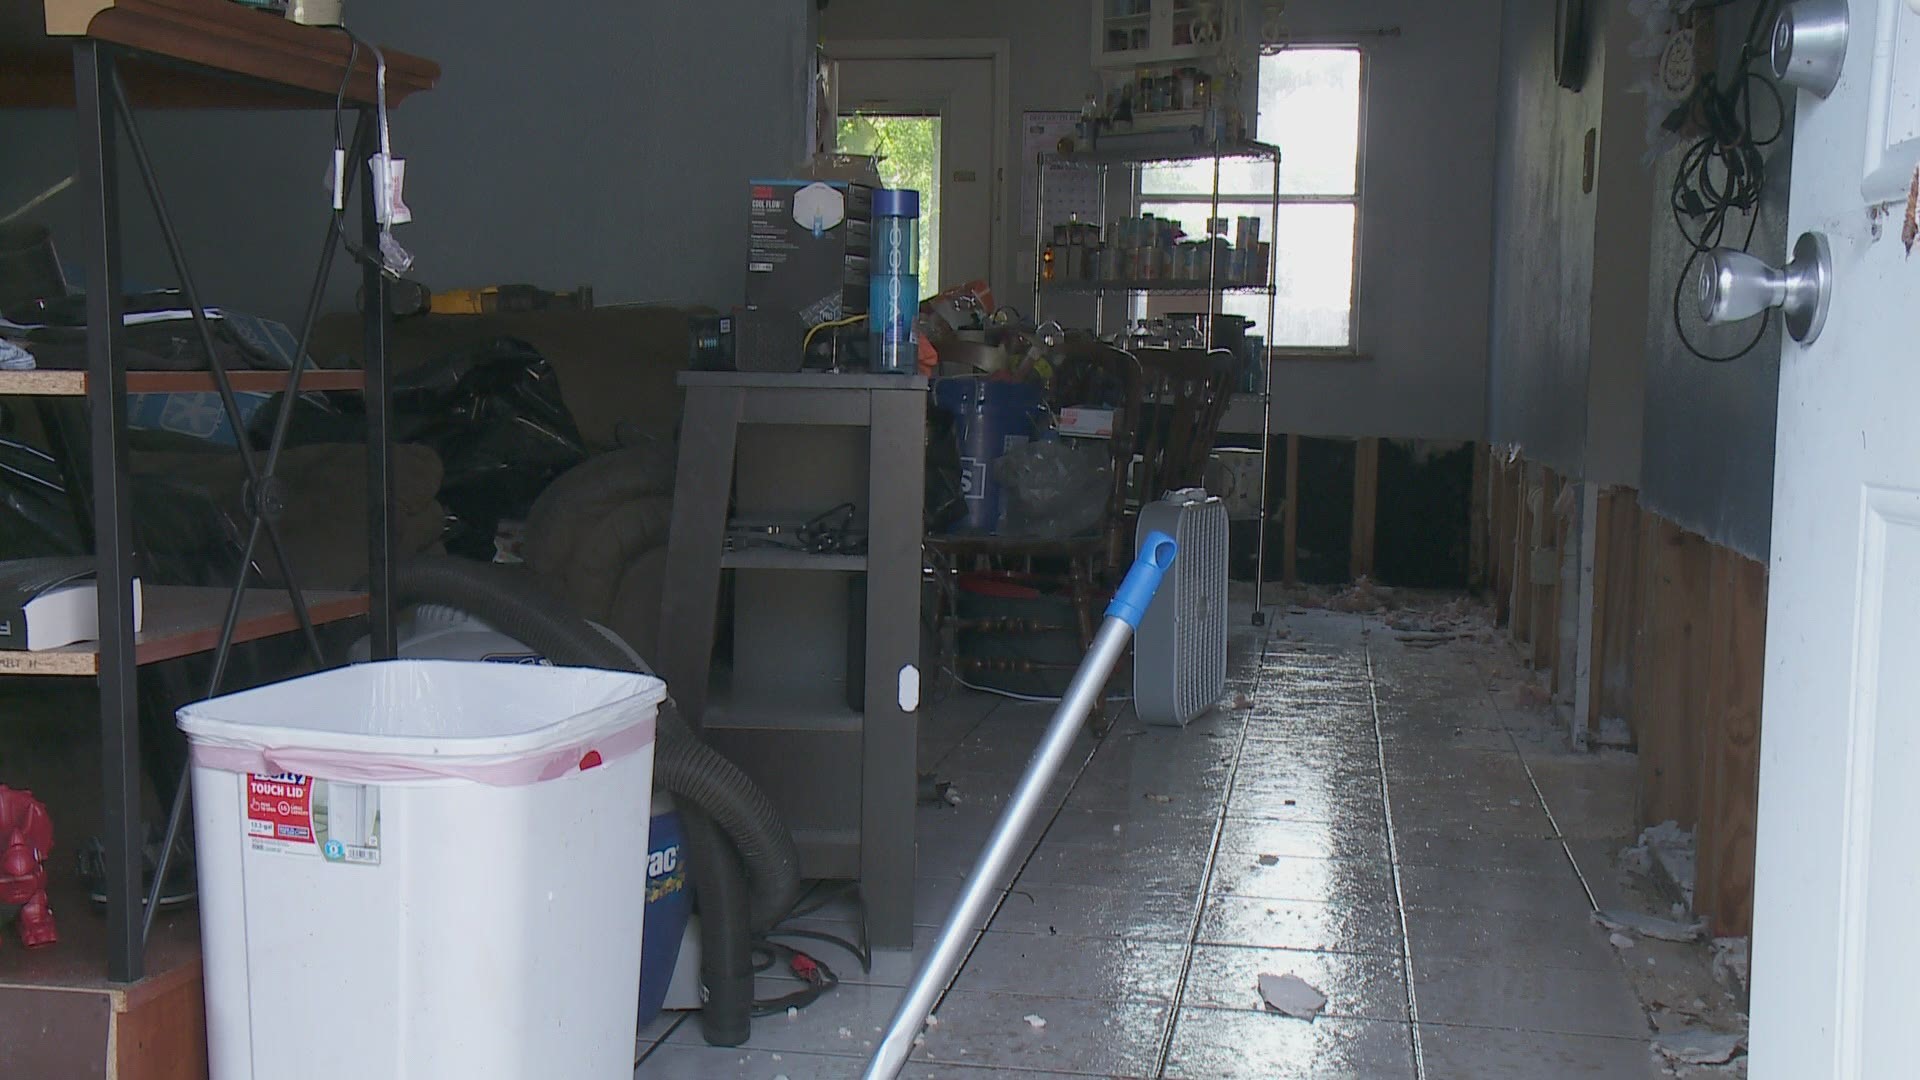 A Slidell family was displaced after Claudette brought flood waters into their early Saturday morning.